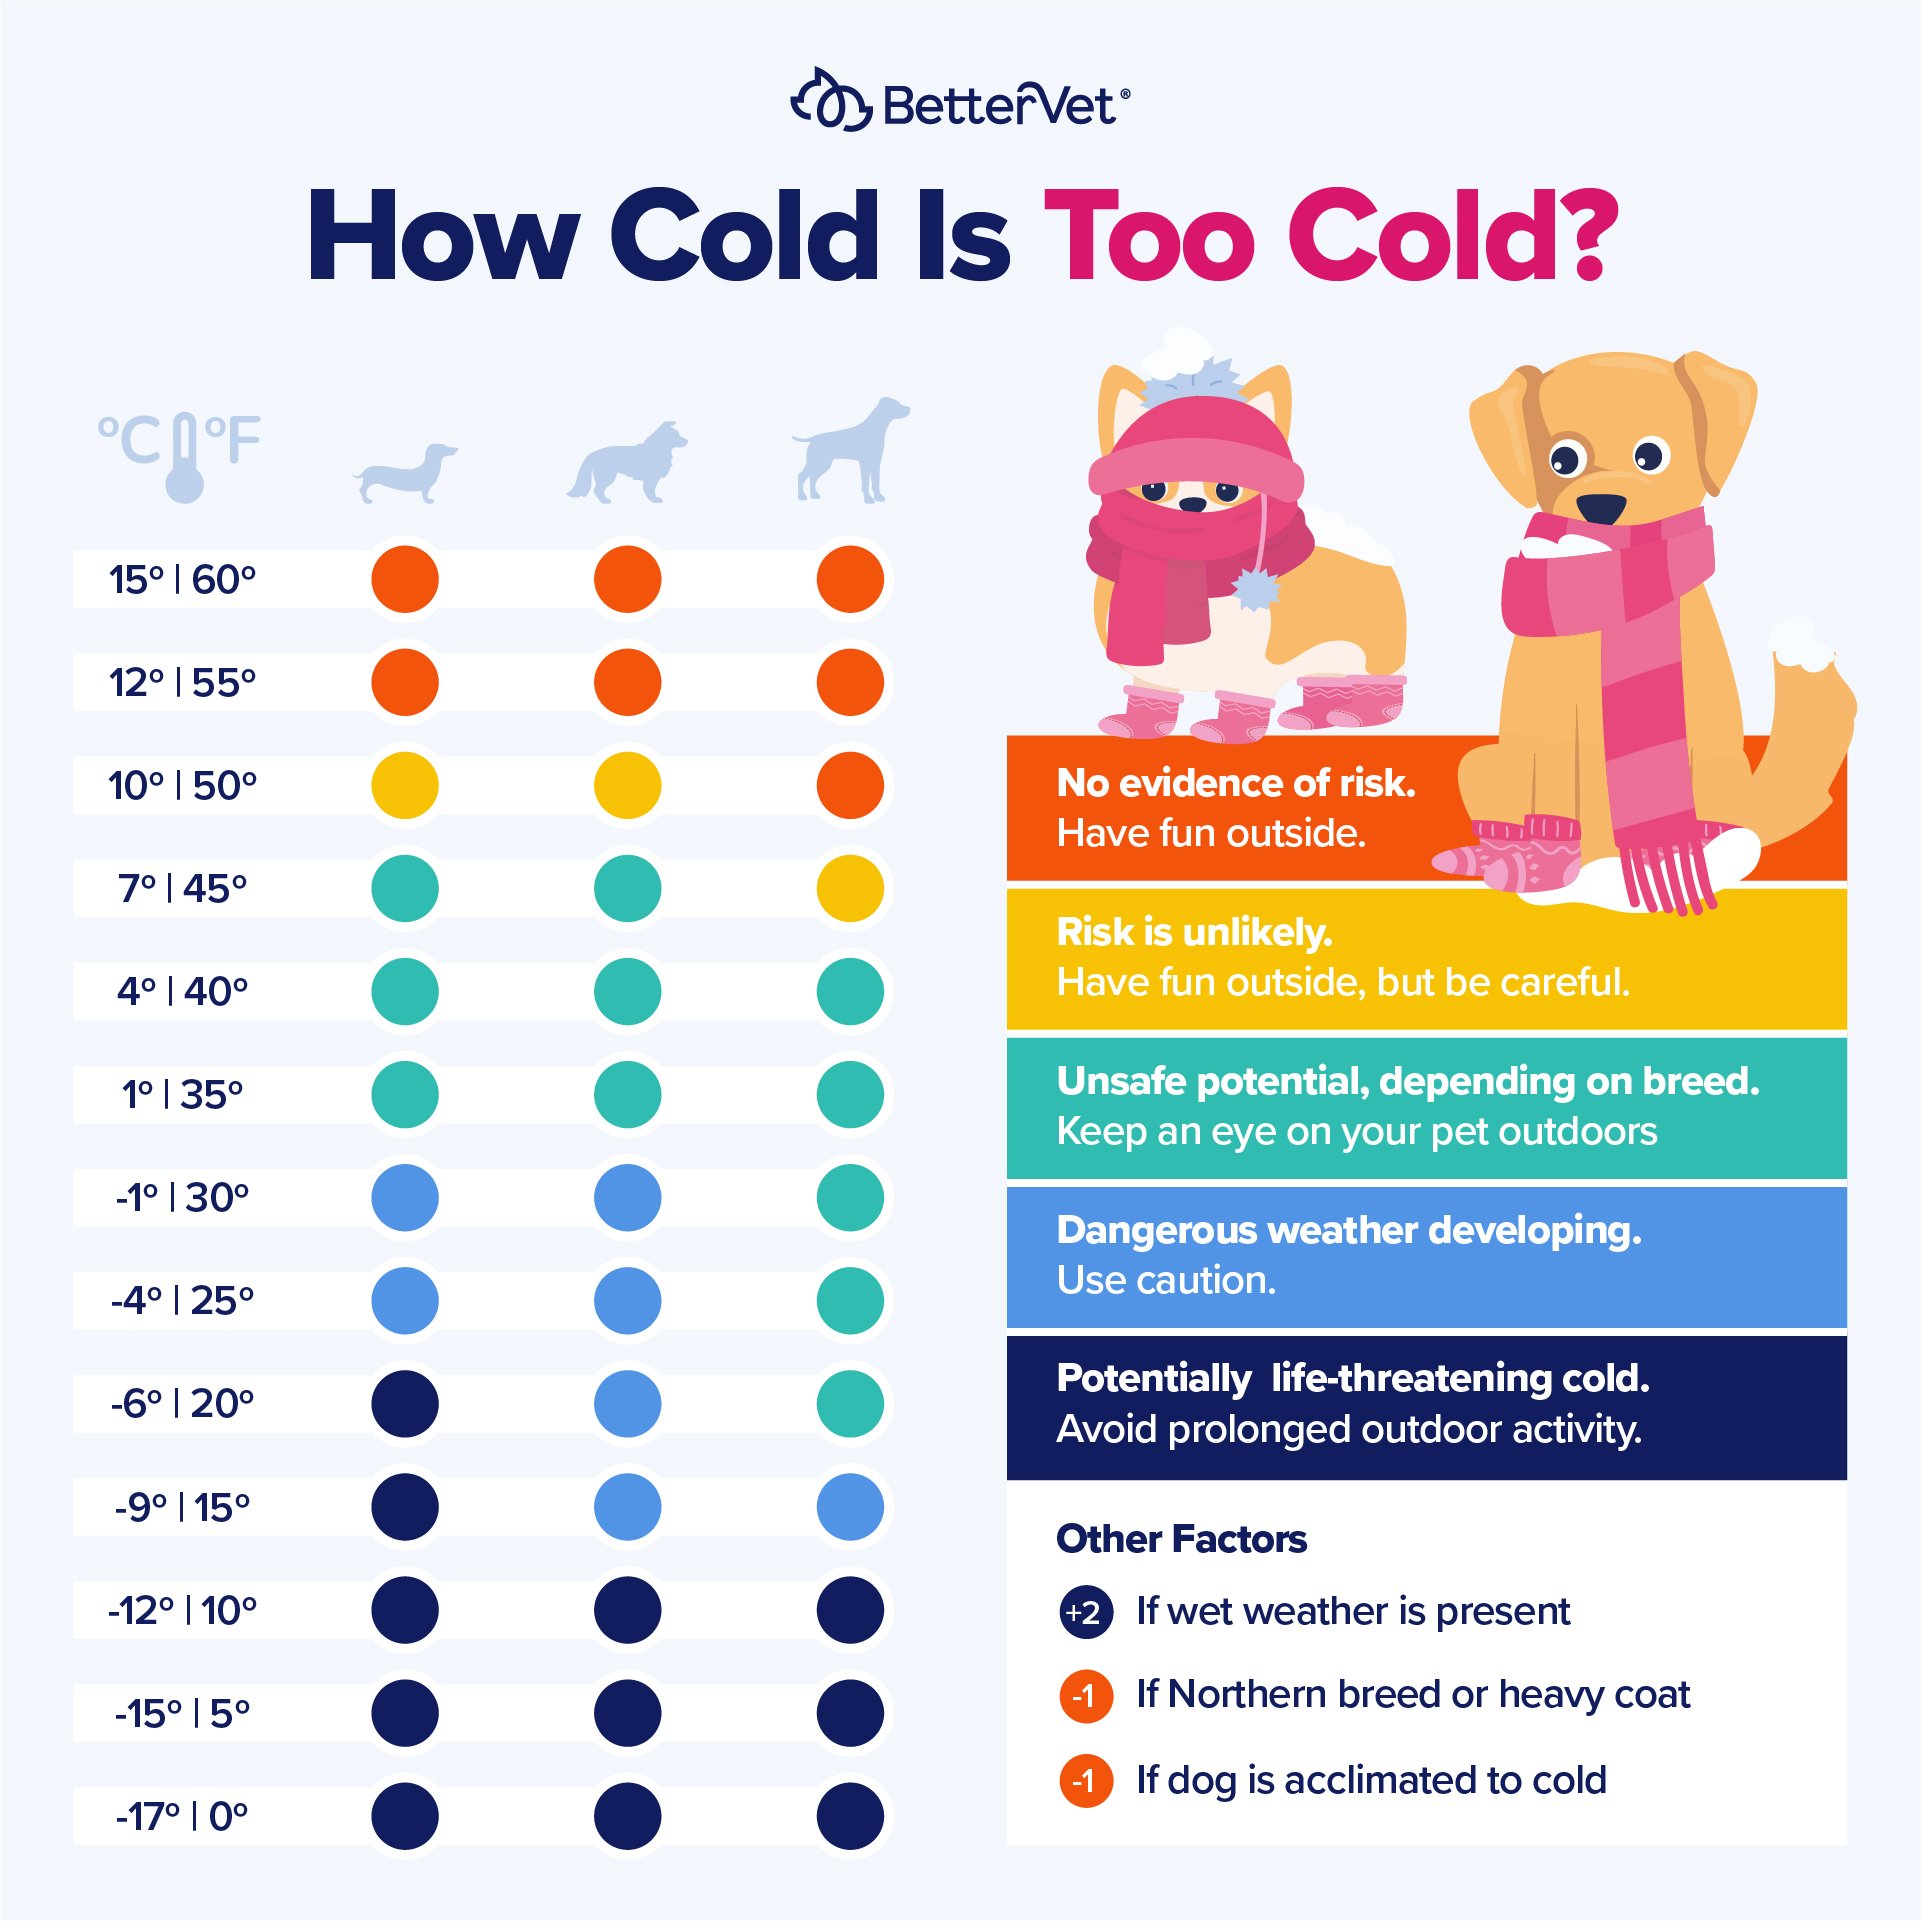 When is it Too Cold to Walk Your Dog? BetterVet